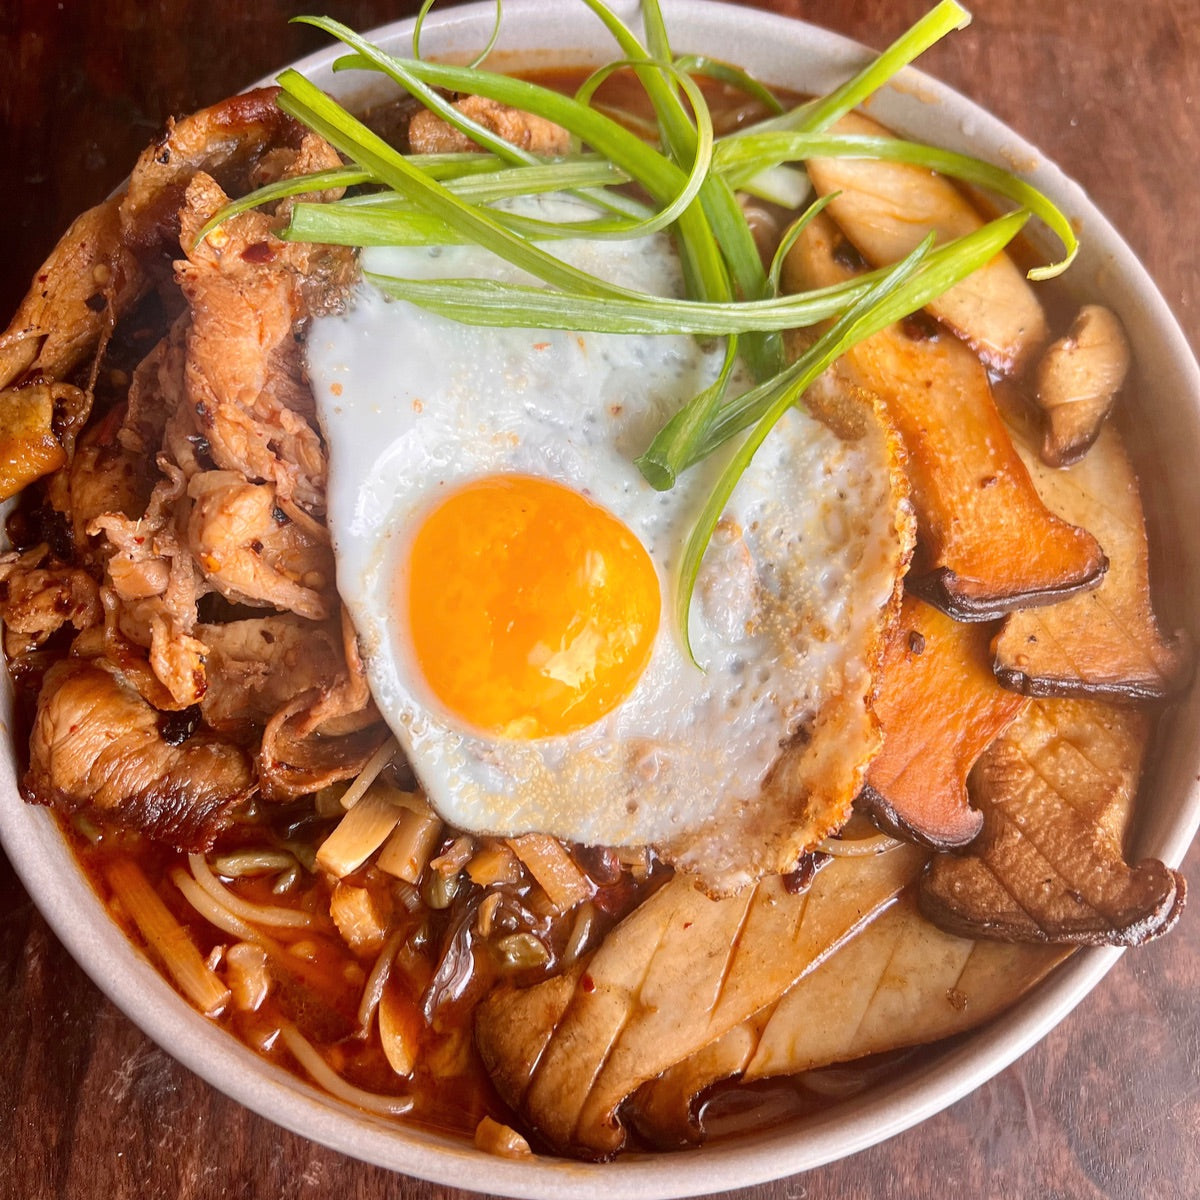 amped up instant noodles with grilled pork and mushrooms and a fried egg